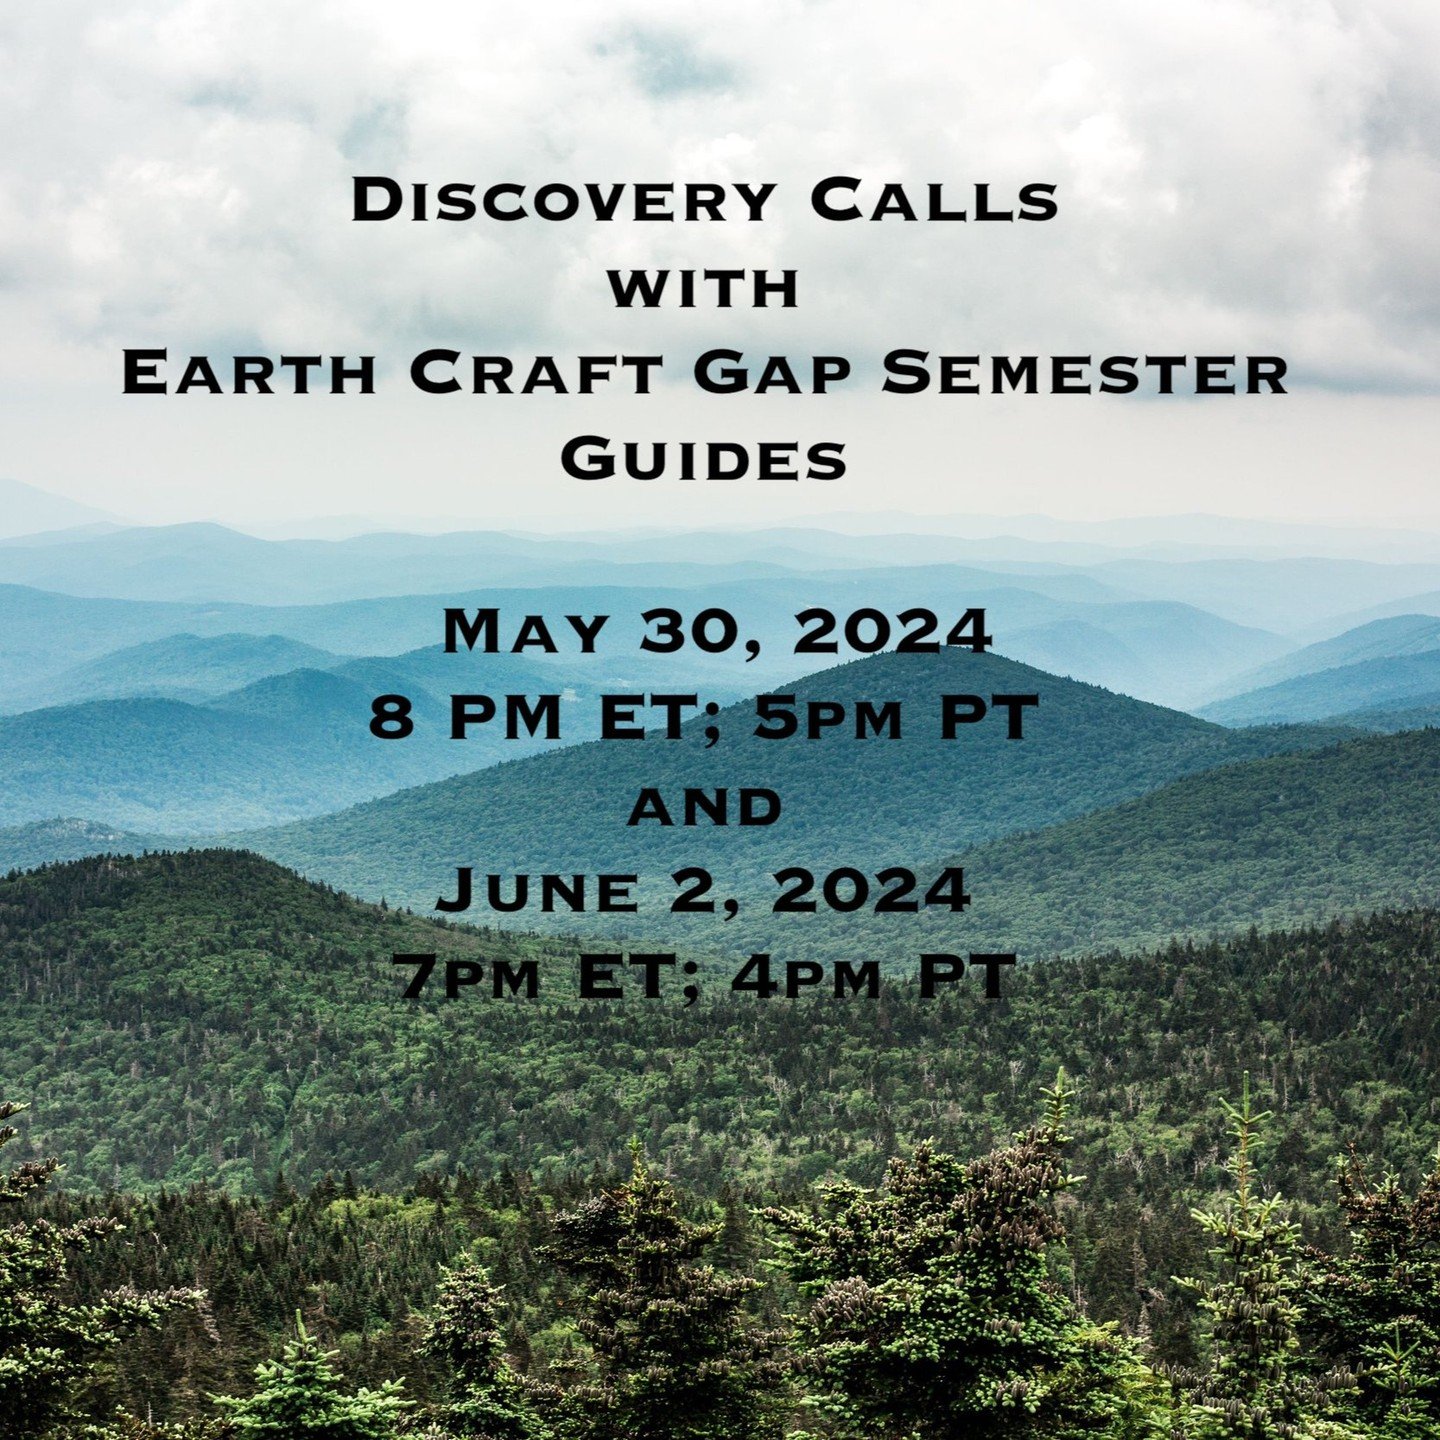 Two discovery calls with our Earth Craft Guides!
May 30 and June 2 on Zoom.

Register and receive the link.

May 30, 2024 08:00 PM Eastern Time (US and Canada) 

Register in advance for this meeting:
https://us02web.zoom.us/meeting/register/tZUrc-ihr